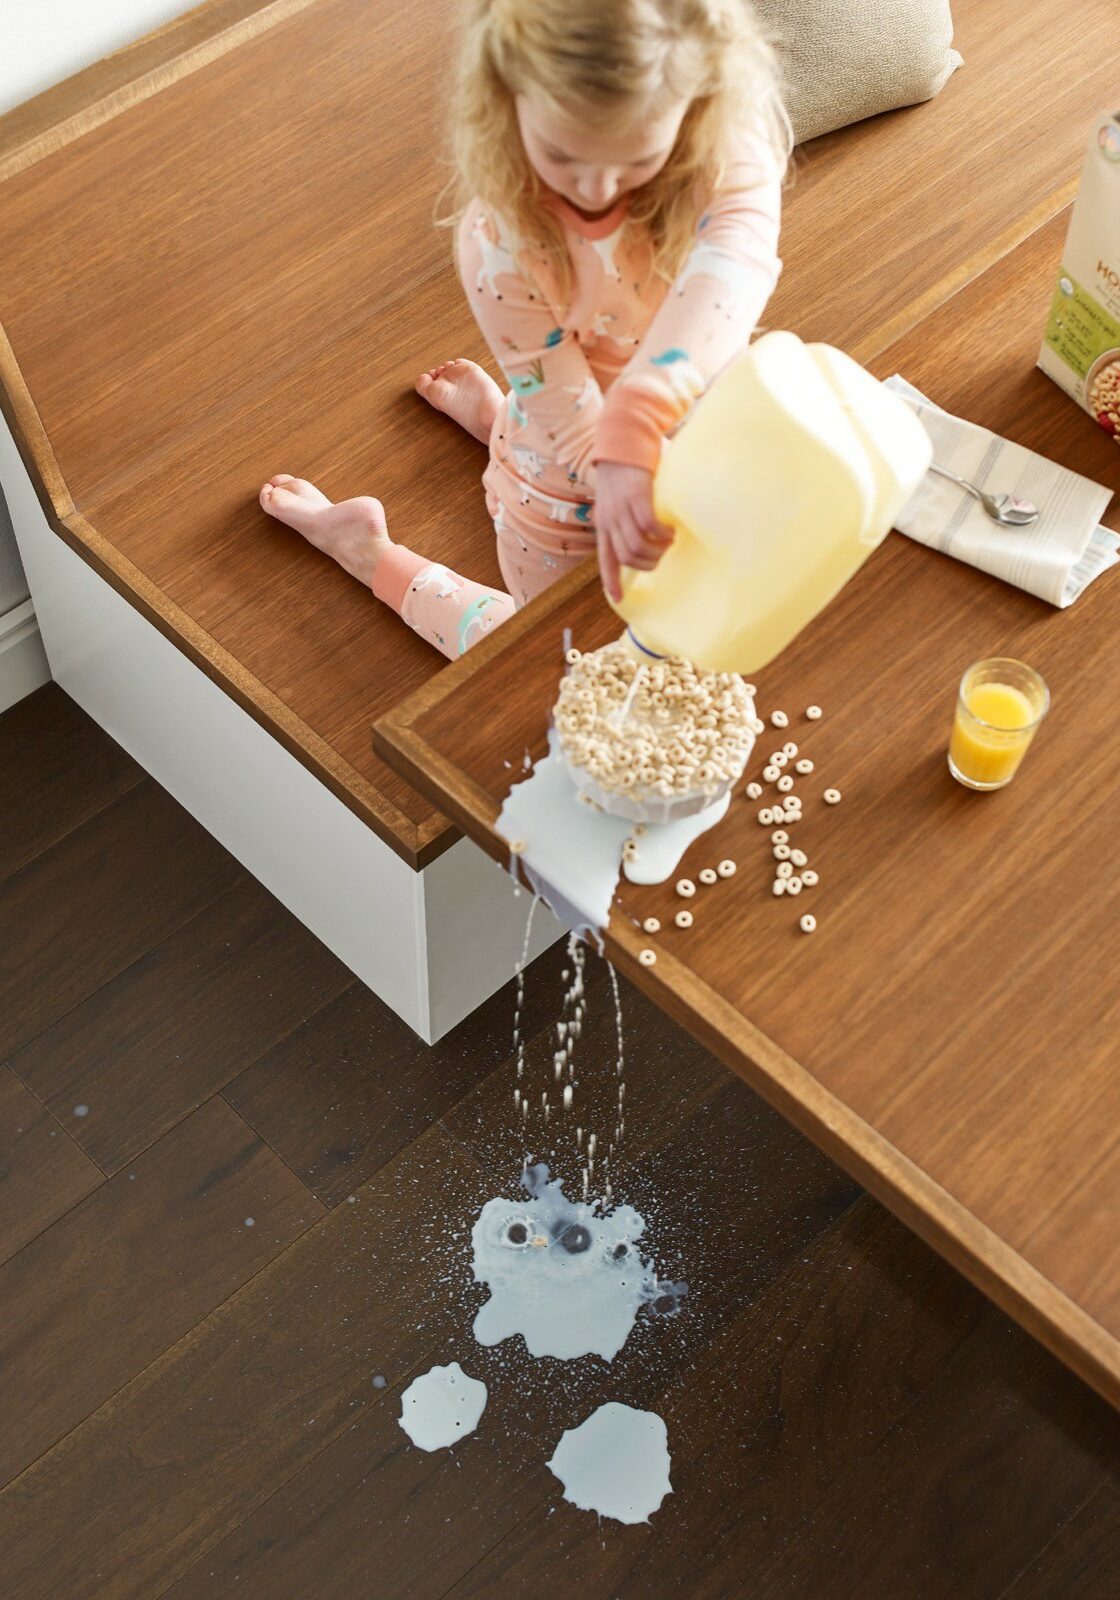 Milk spill cleaning | Floor to Ceiling Marshall